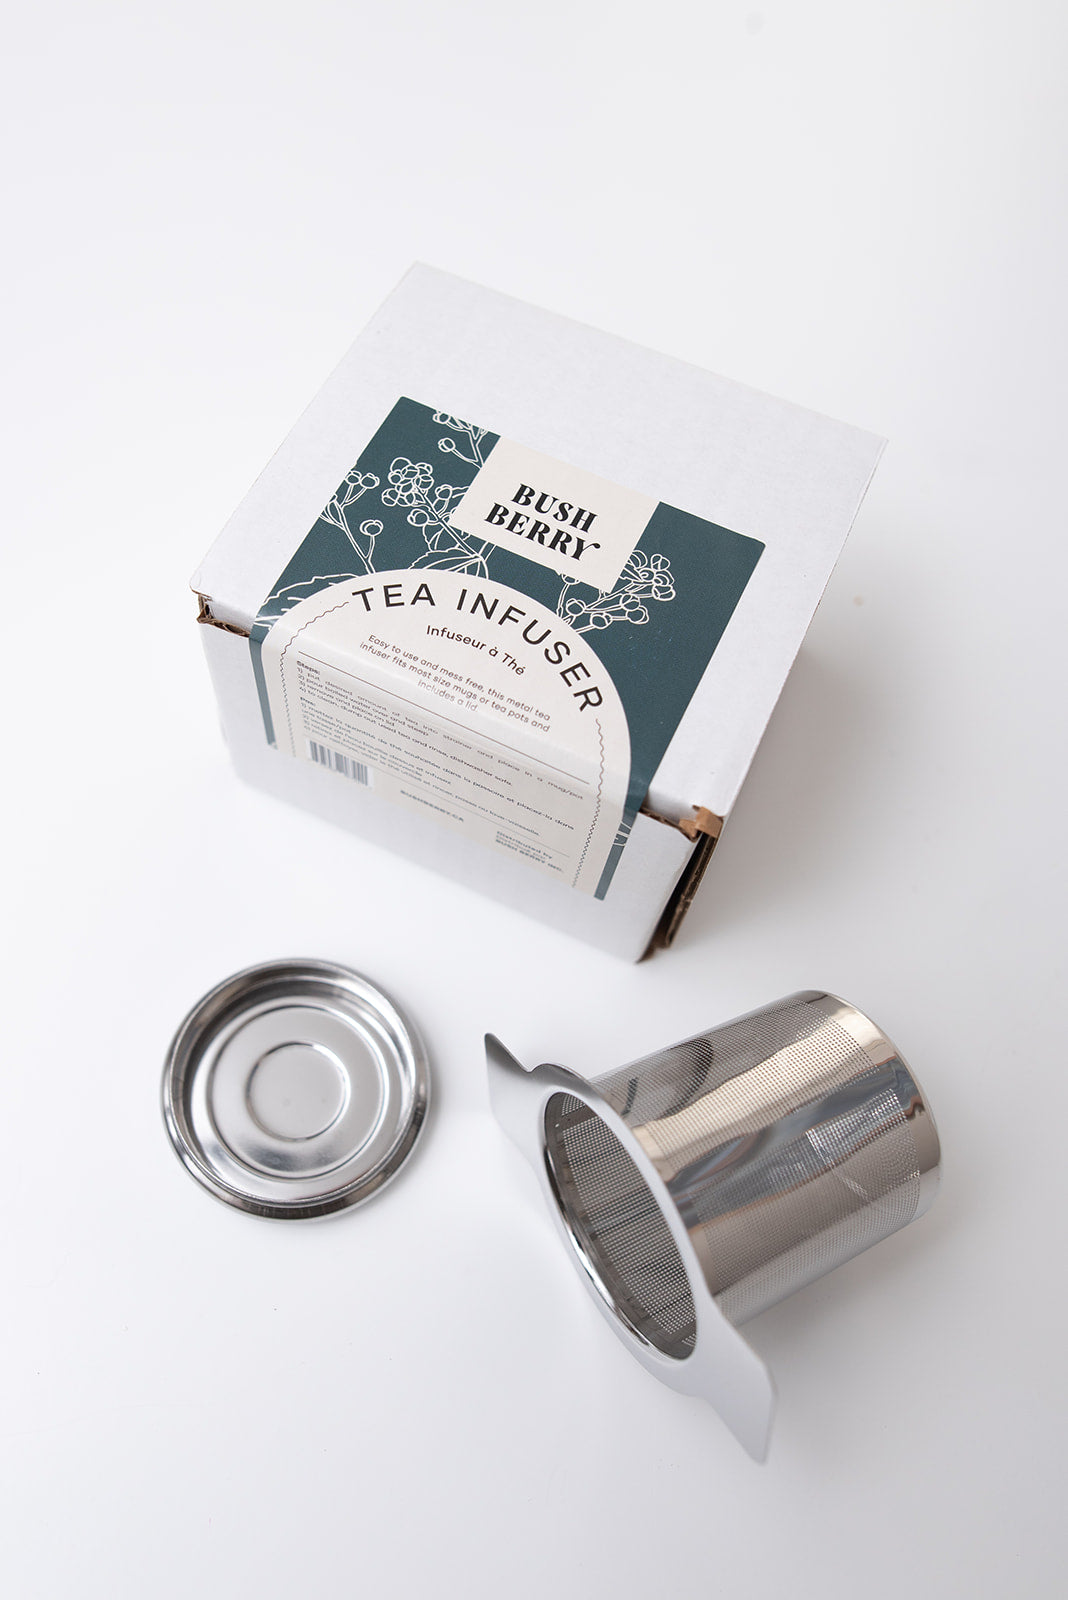 Tea Brewing | Accessories for the tea enthusiast